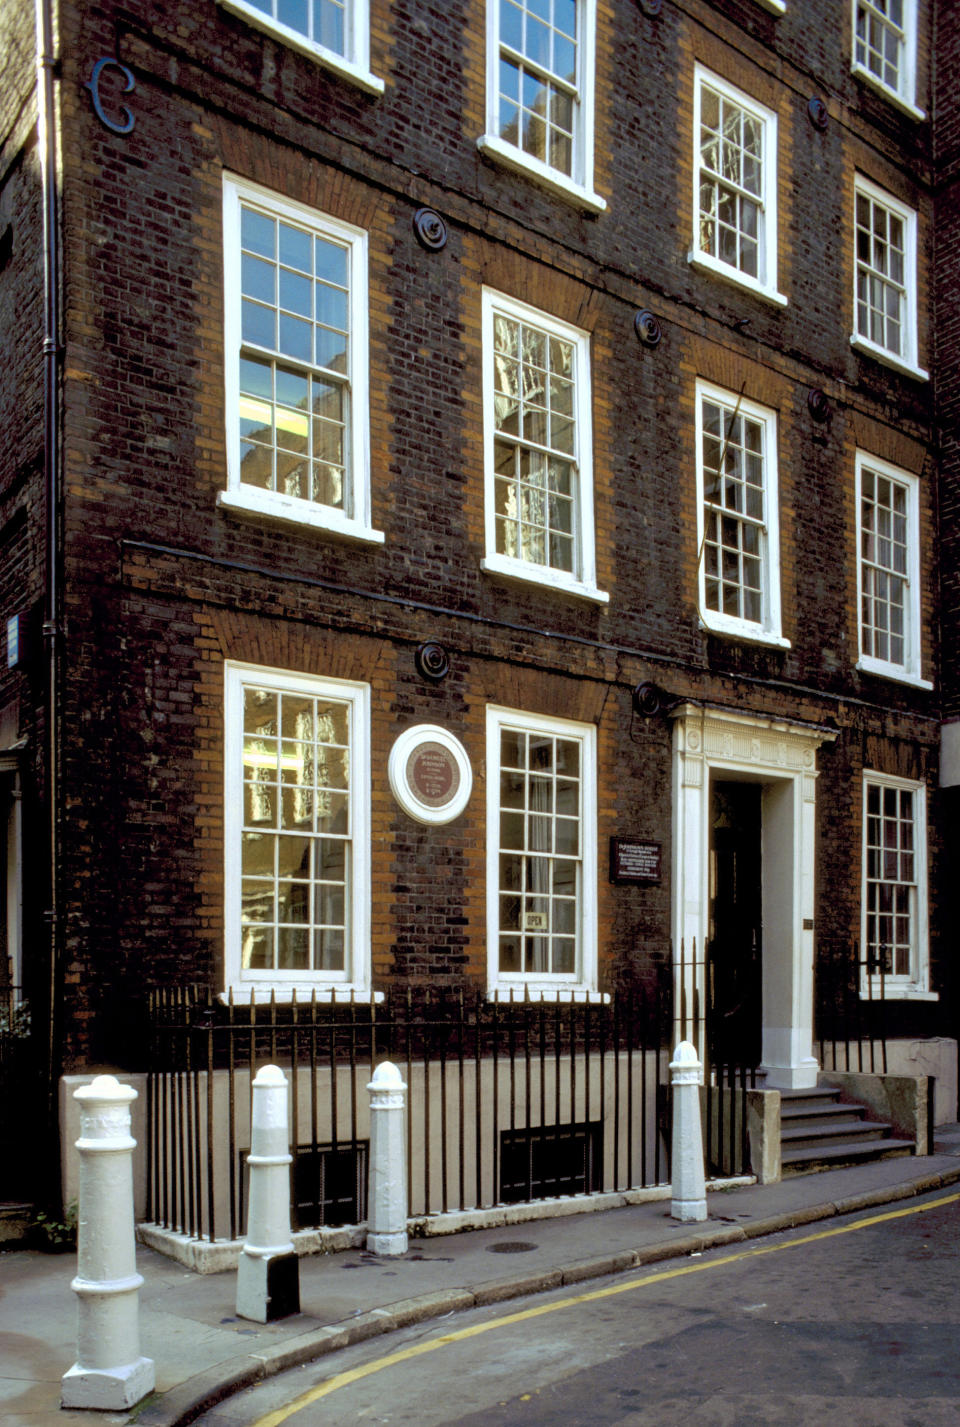 This March 17, 2009 photo released by provided by VisitBritain shows Dr. Johnson’s House, a small museum in the 300-year-old townhouse where Samuel Johnson lived in London. Johnson was an author, critic and lexicographer who wrote “A Dictionary of the English Language,” published in 1755. His house makes a good destination for visitors on a literary tour of London. (AP Photo/VisitBritain)